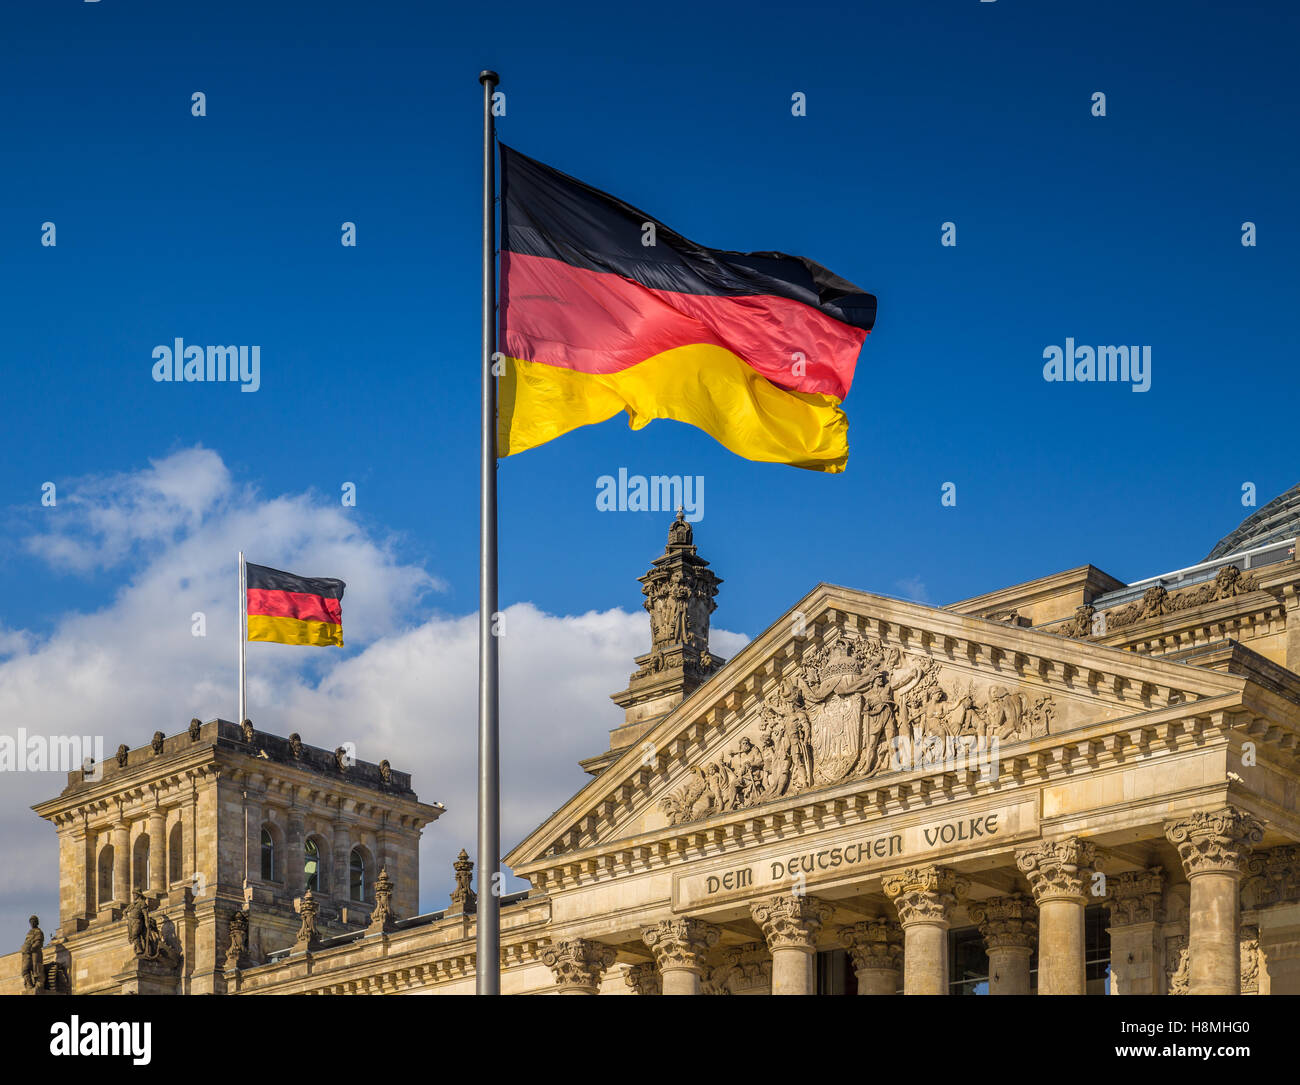 German flags waving in the wind at famous Reichstag building, seat of the German Parliament, on a sunny day in Berlin, Germany Stock Photo